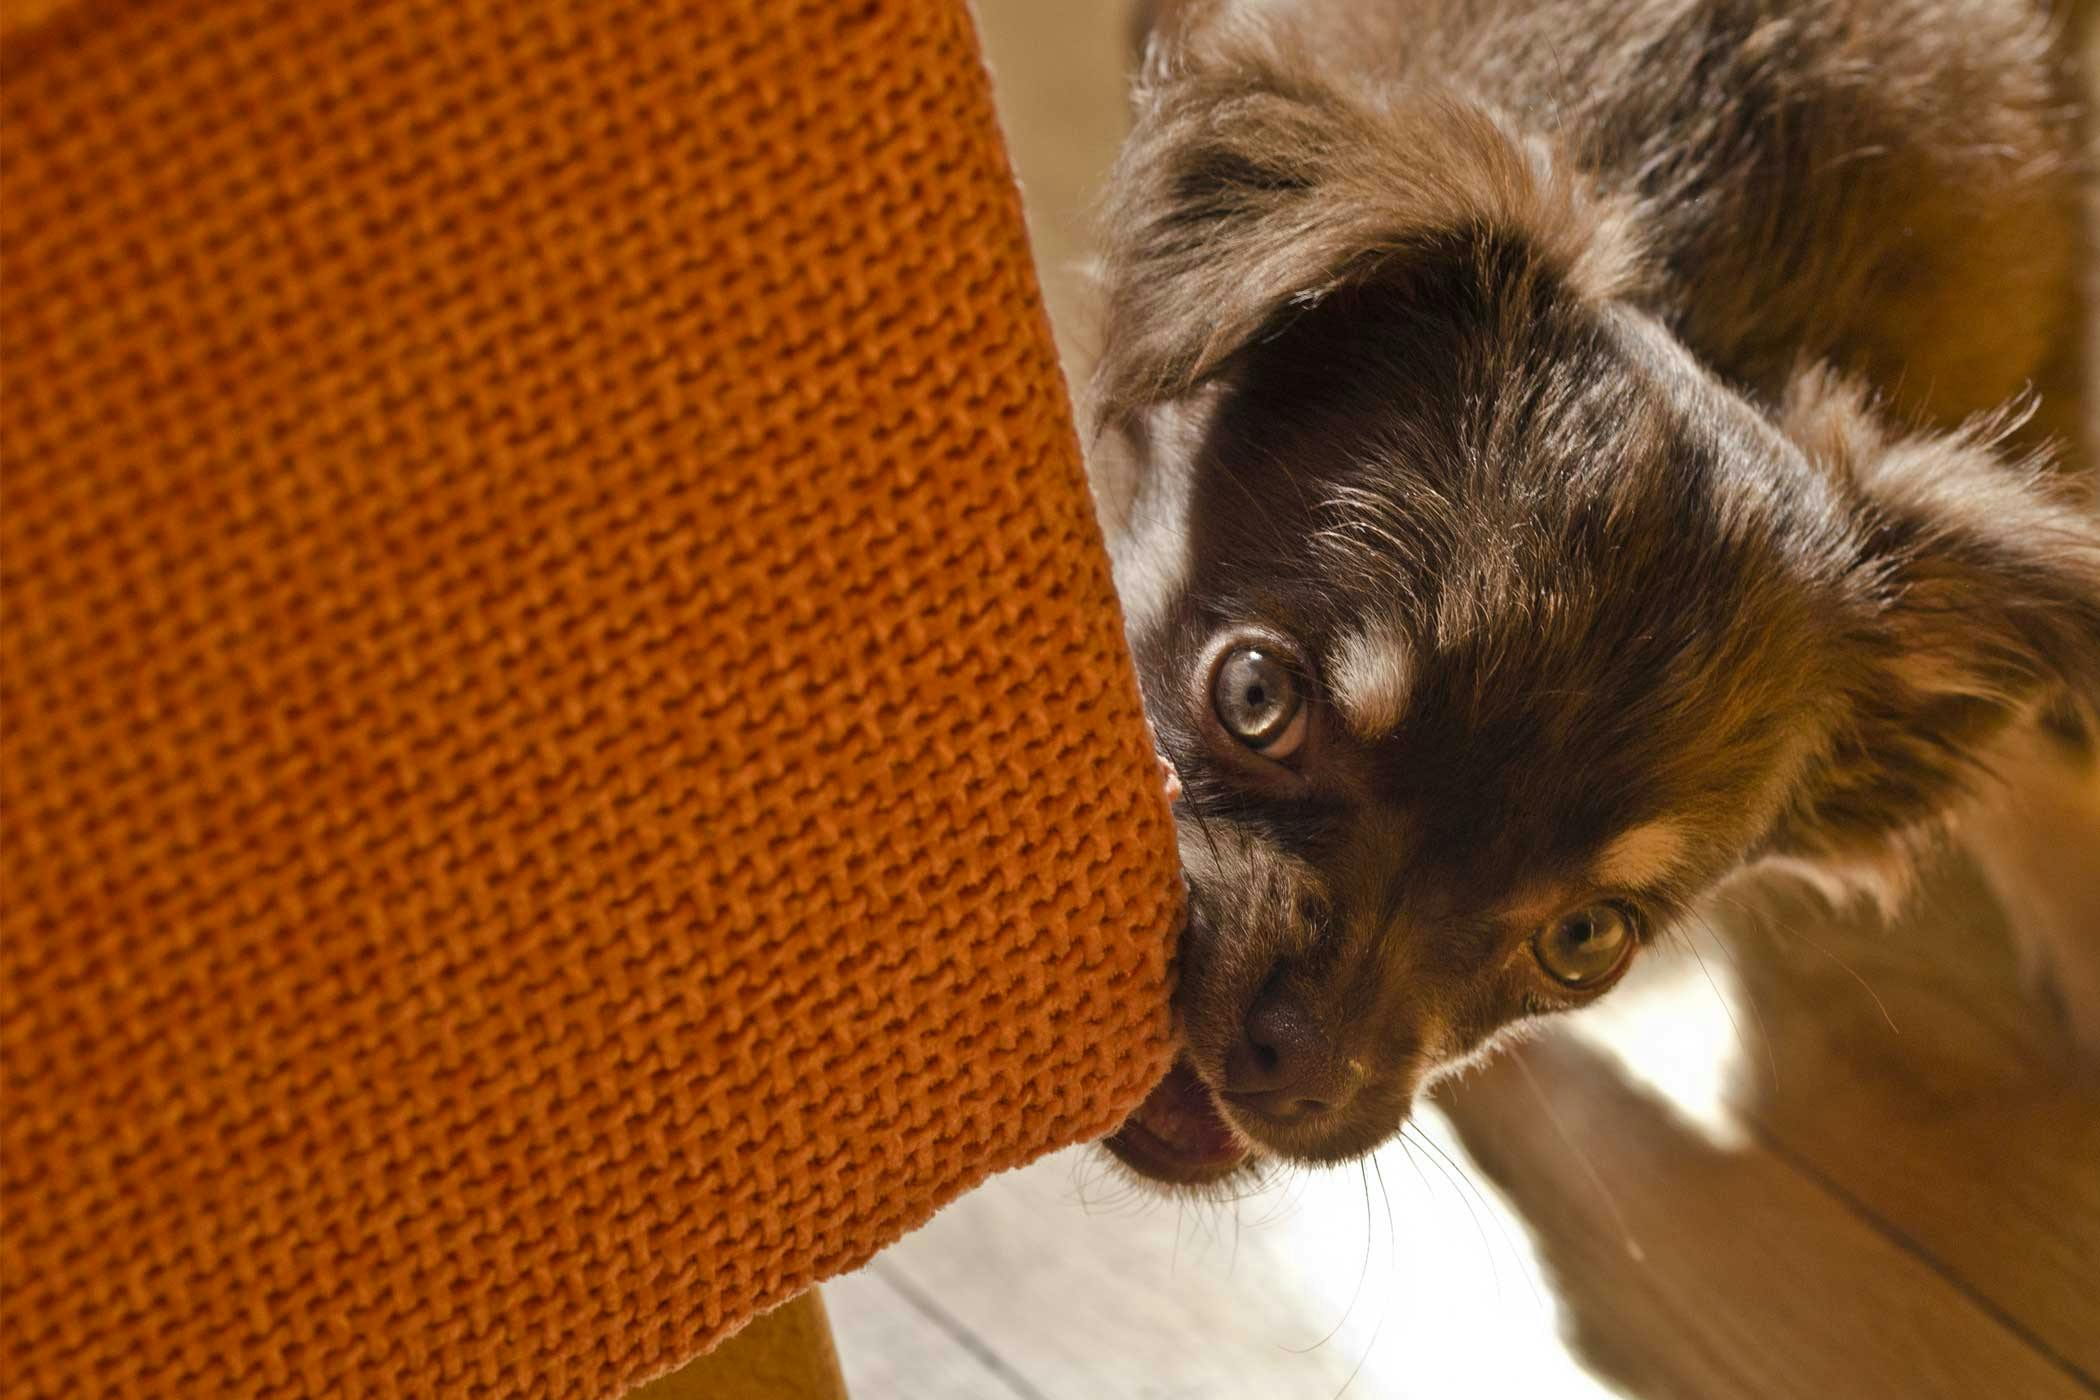 How to Train Your Dog to Not Chew on Furniture | Wag!